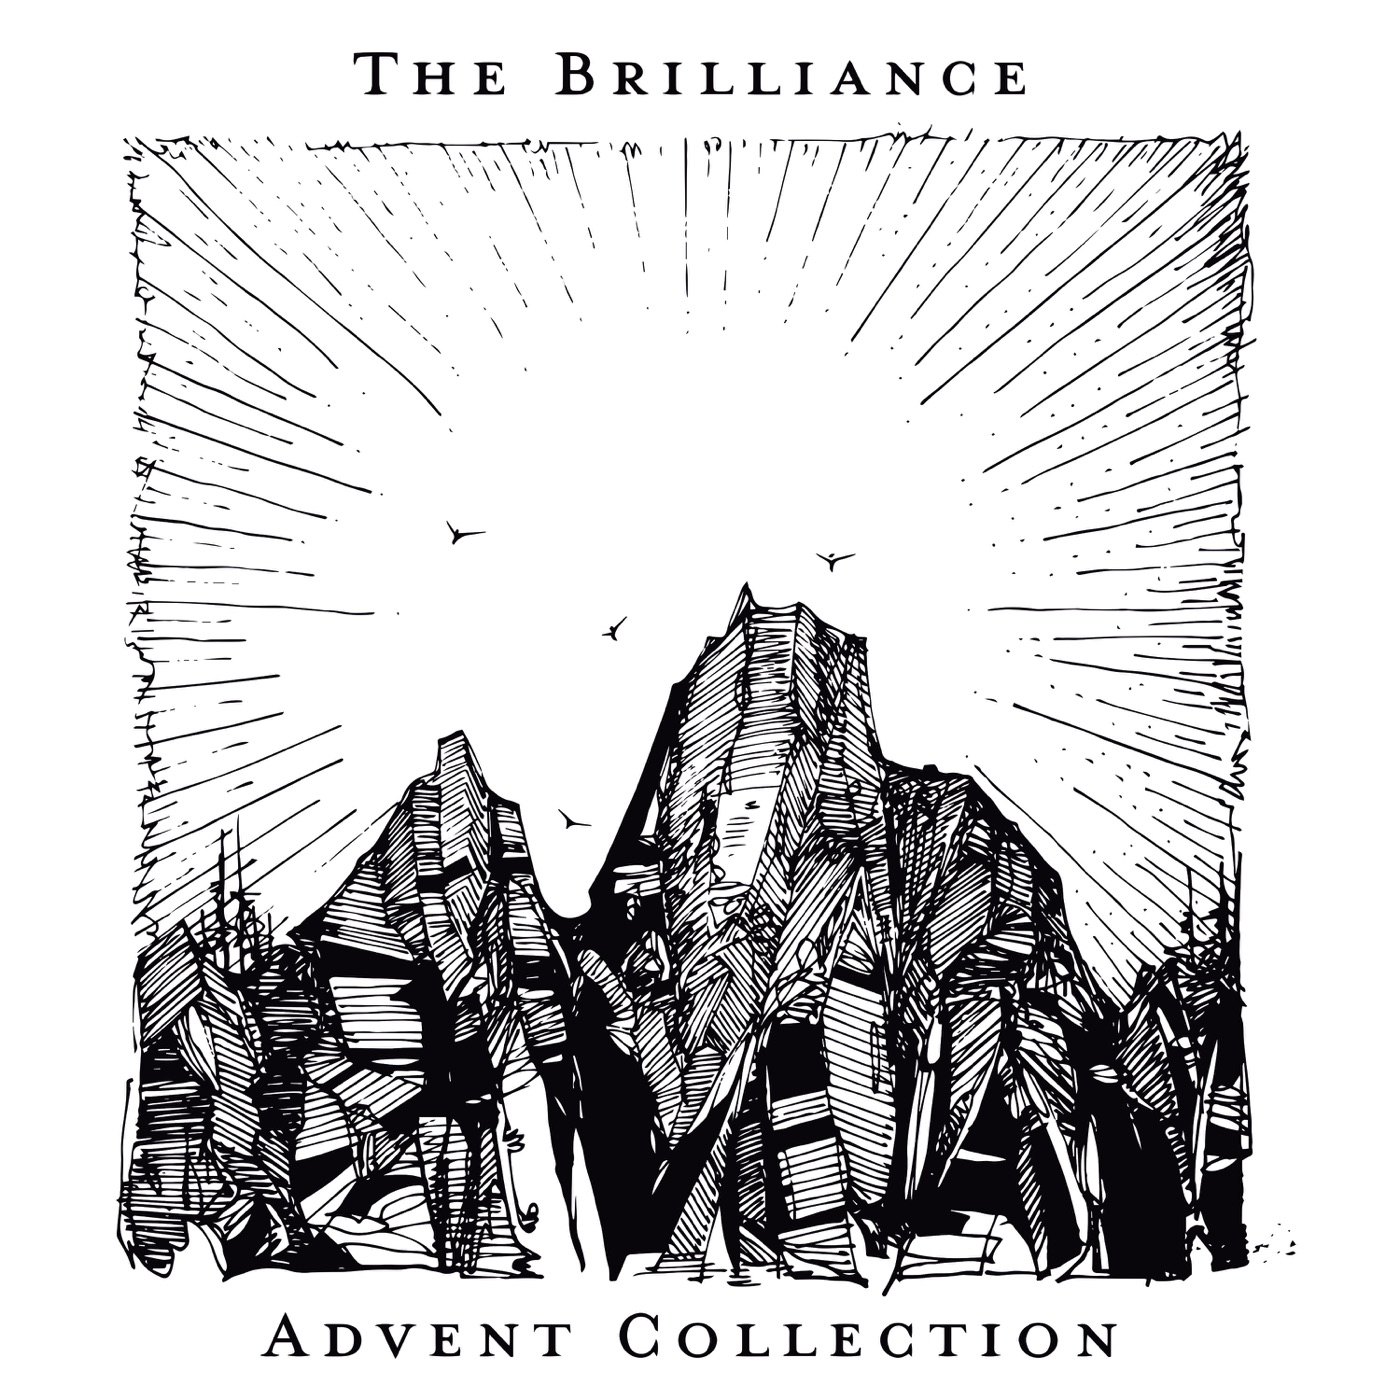 Advent Collection (Remastered) by The Brilliance